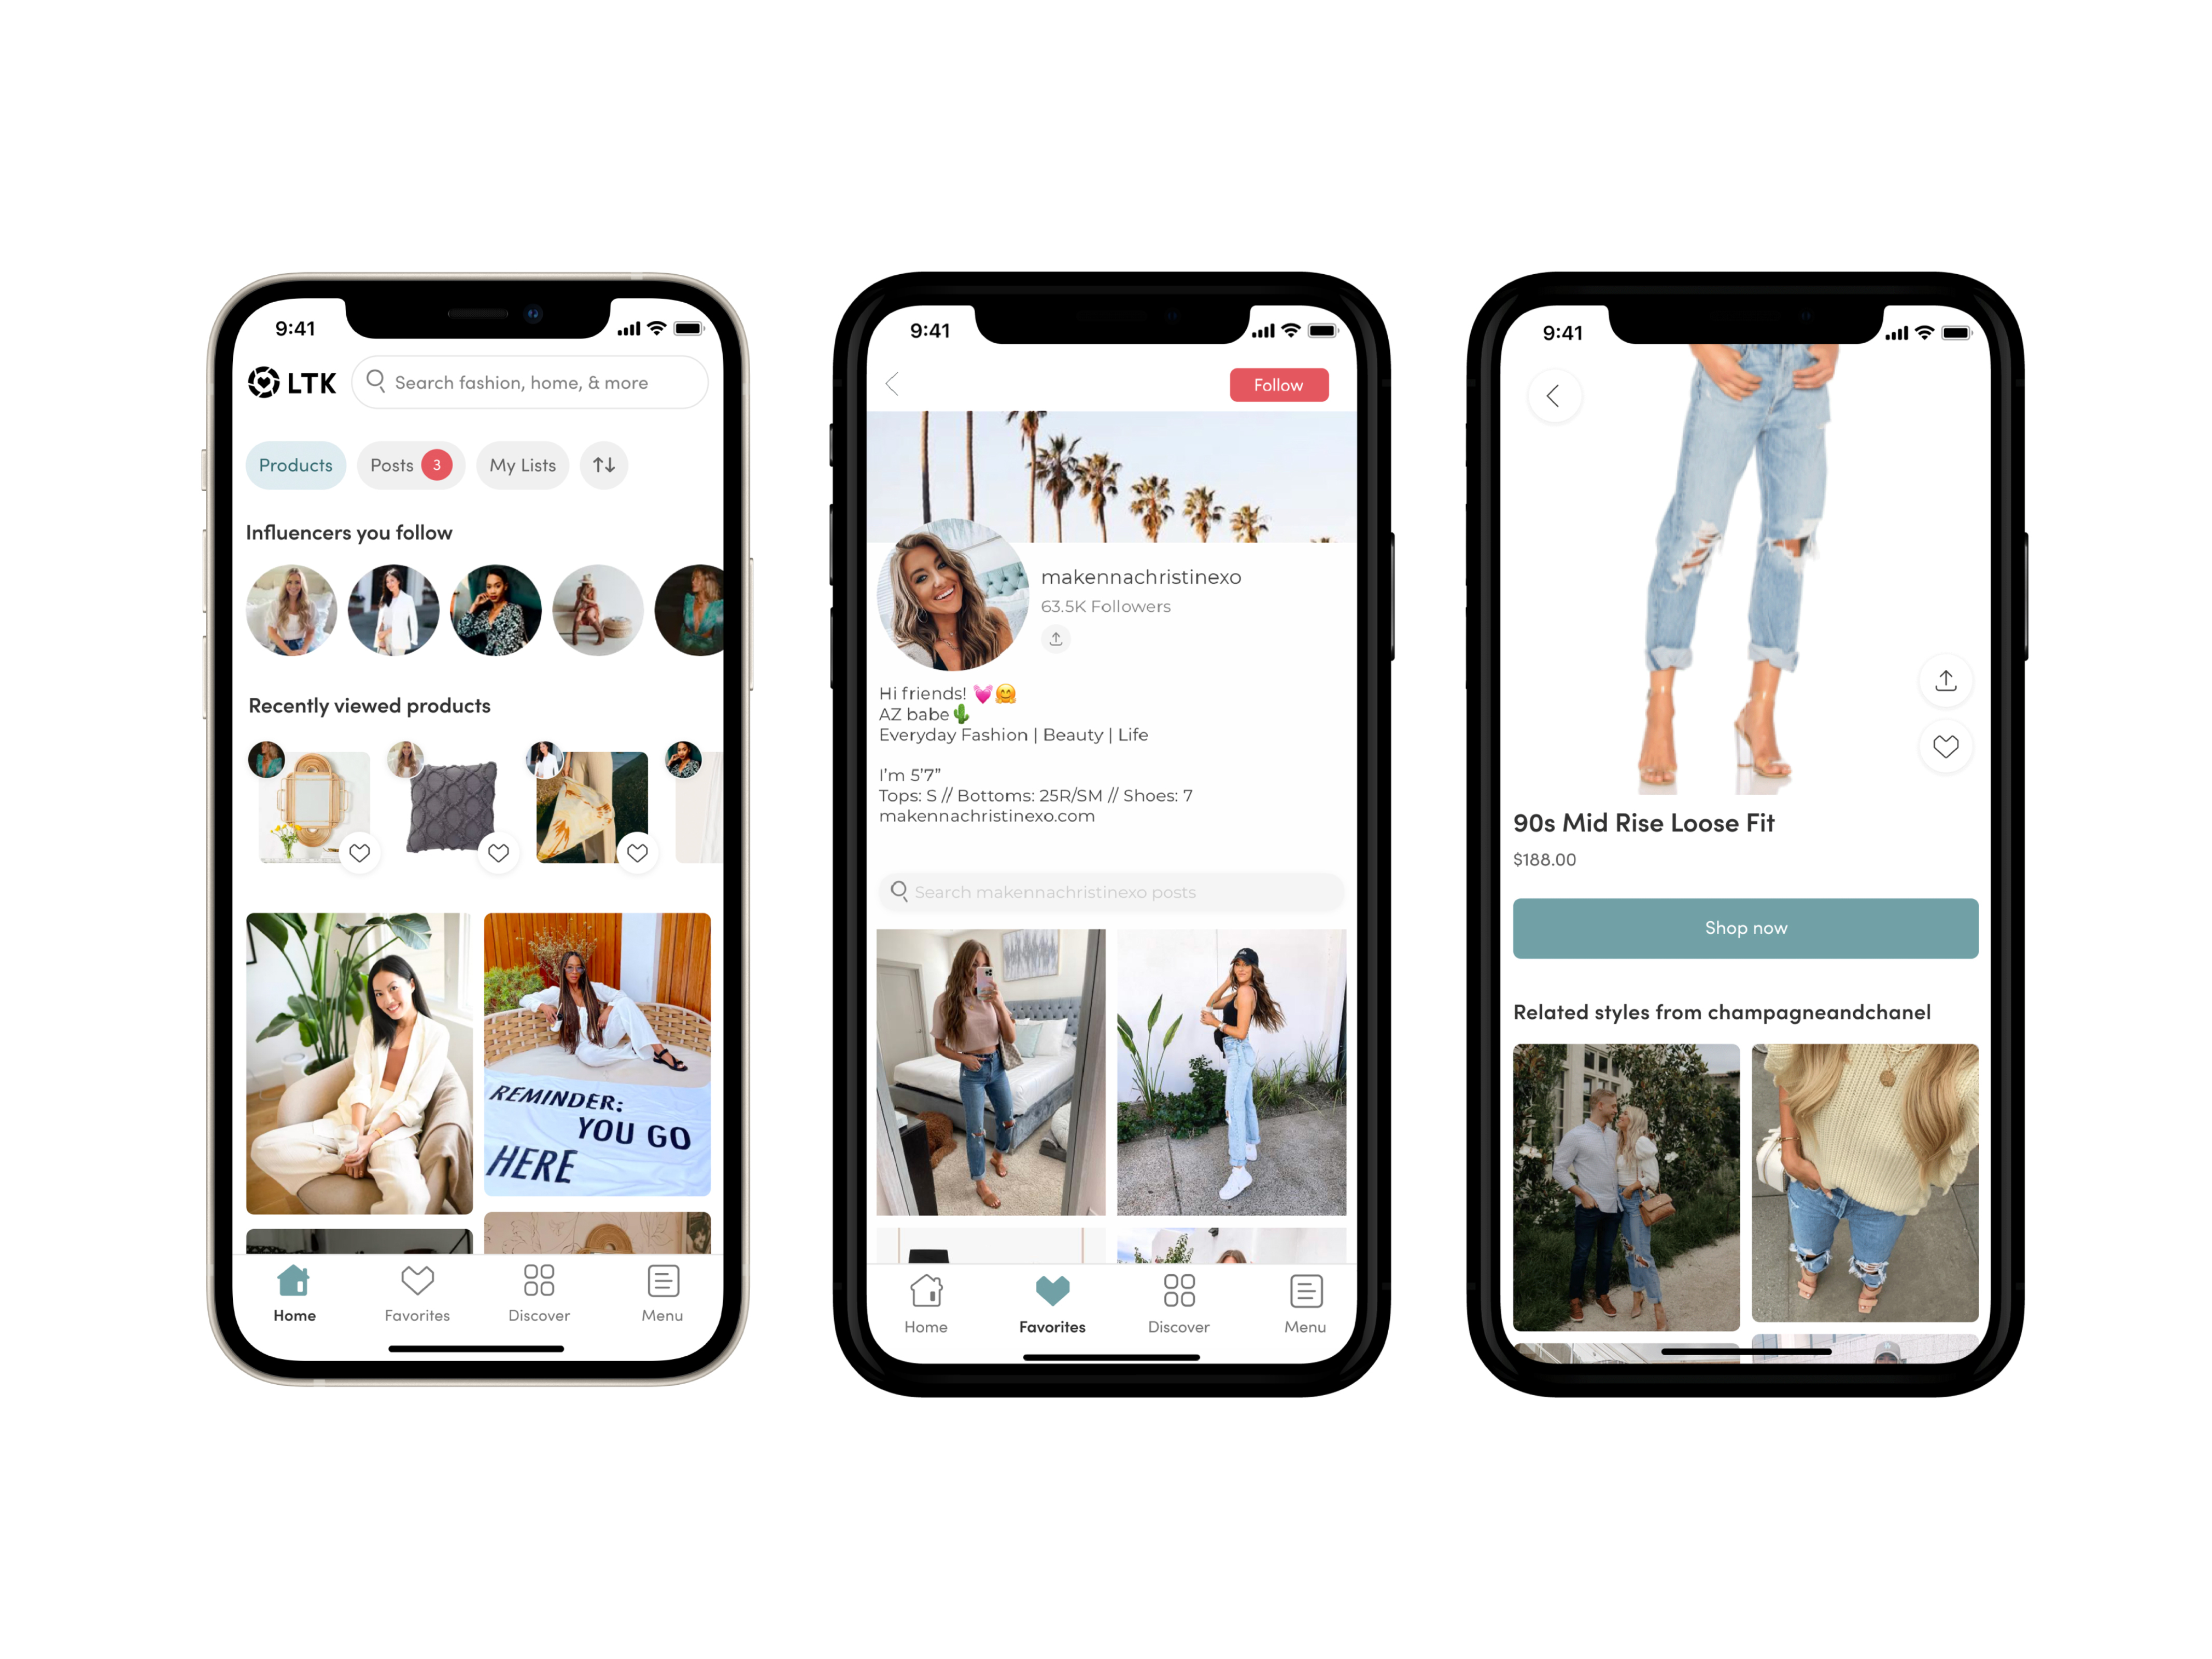 Influencer commerce firm rewardStyle rebrands LikeToKnow shopping